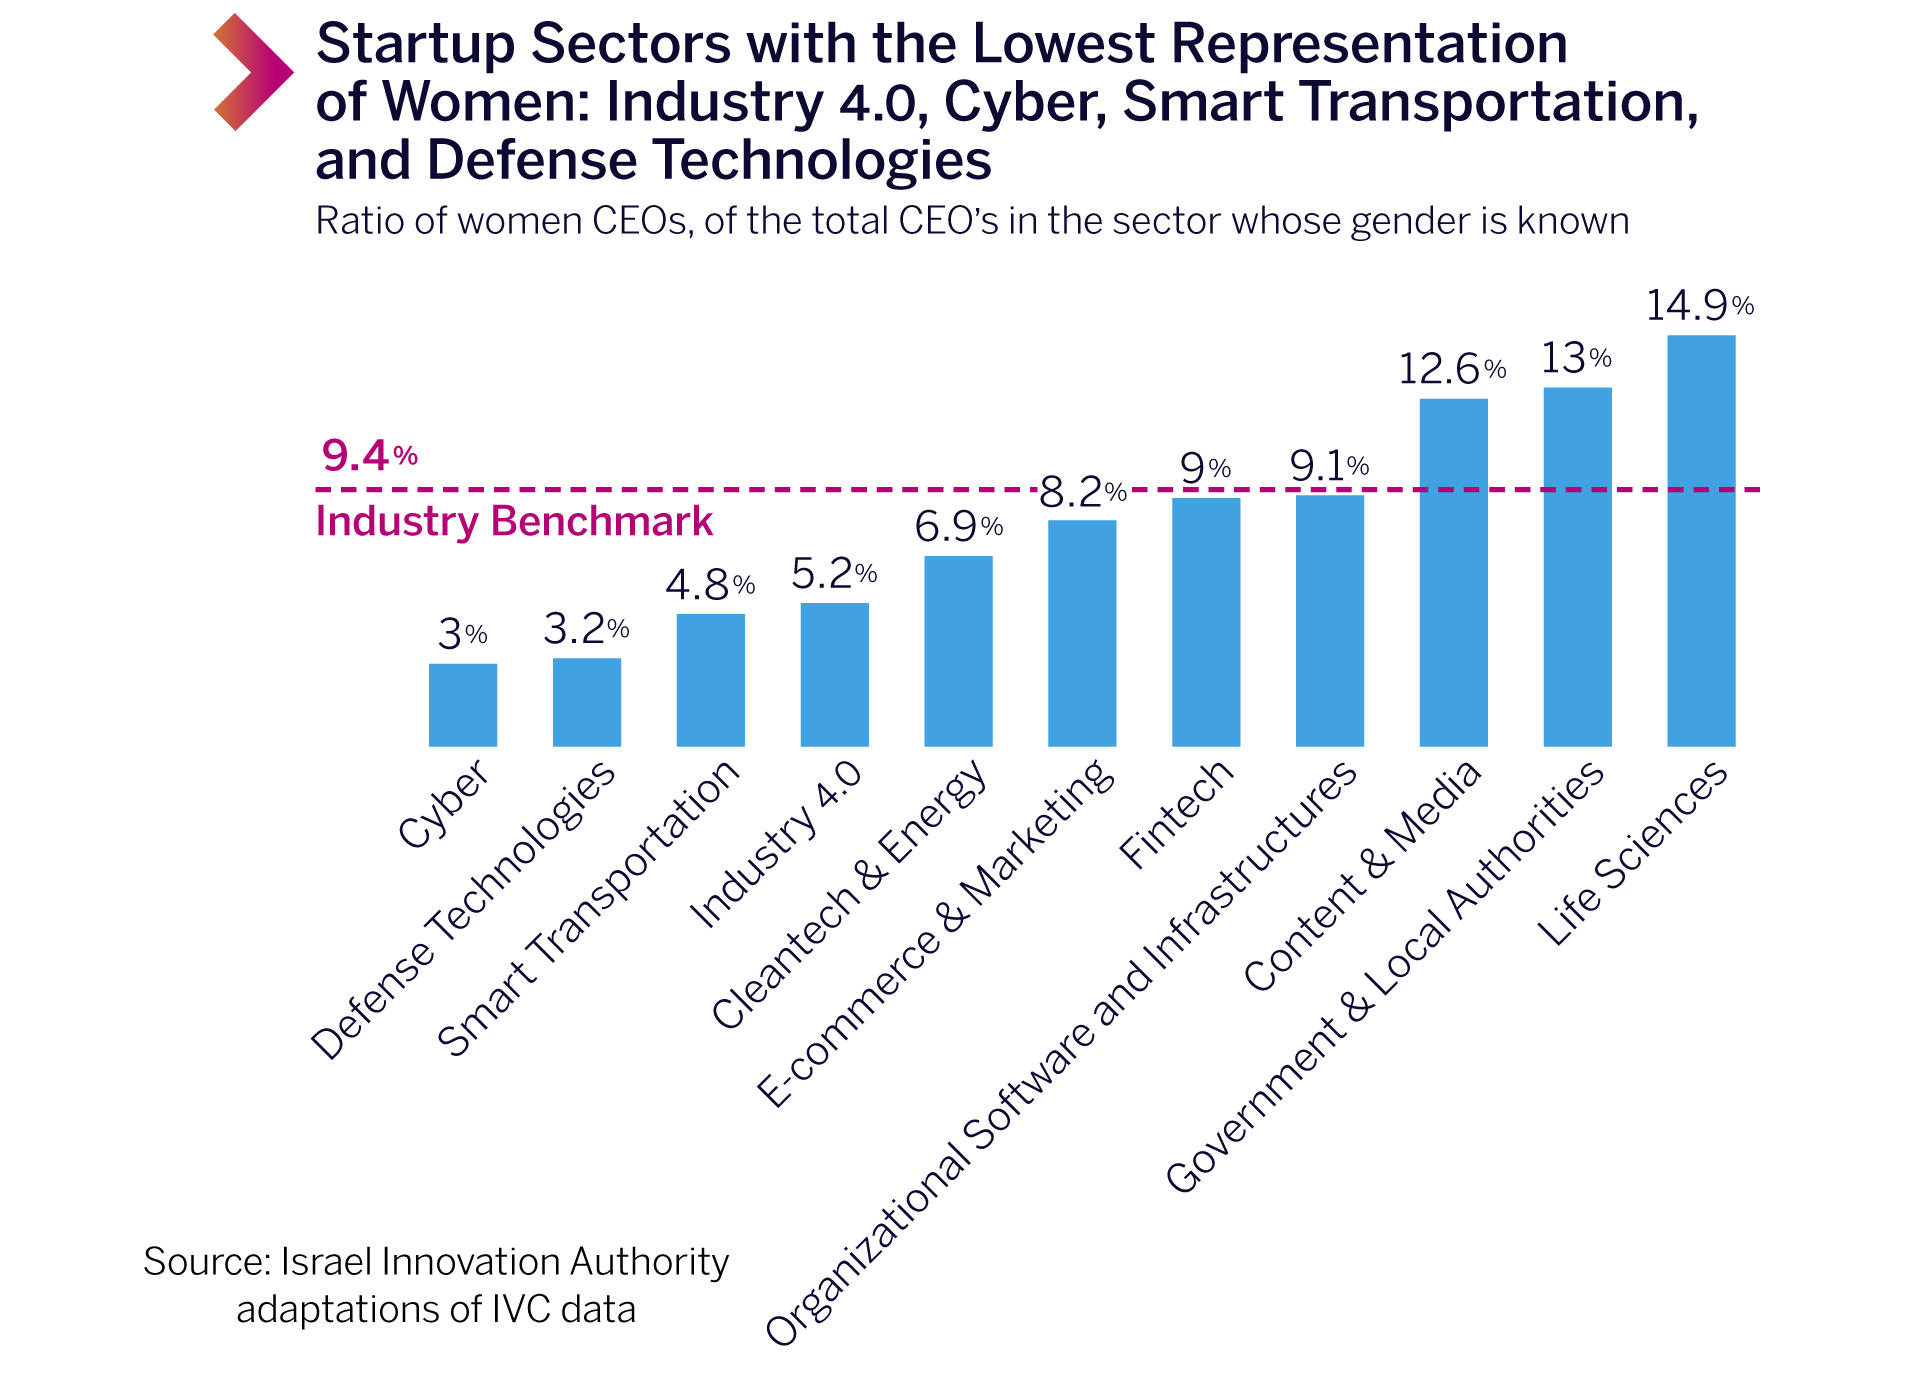 Startup Sectors with the Lowest Representation of Women: Industry 4.0, Cyber, Smart Transportation, and Defense Technologies